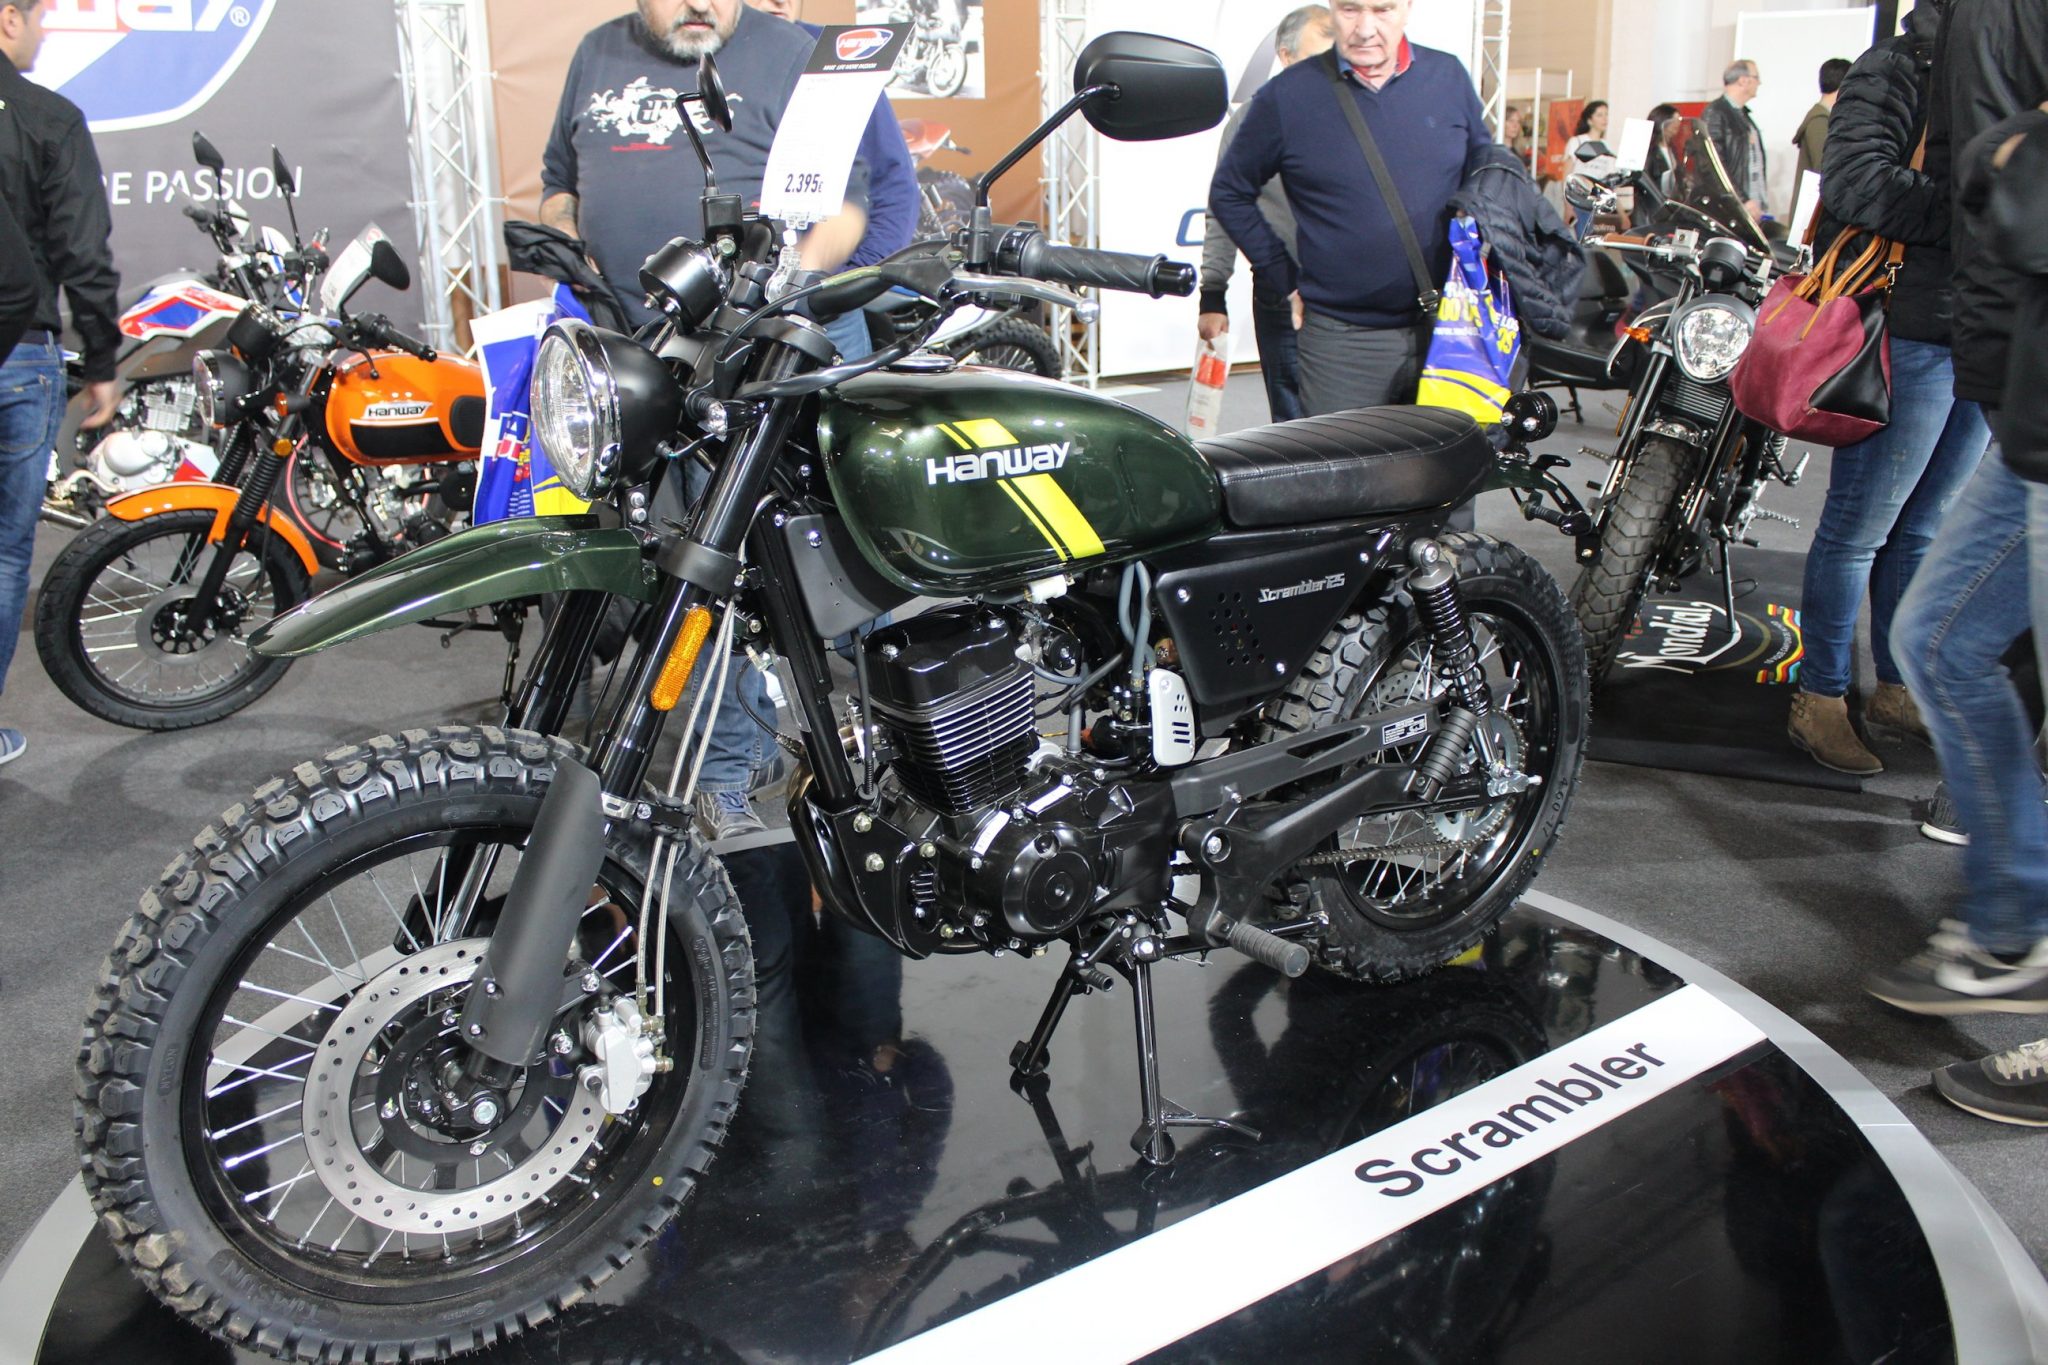 This Hanway Scrambler 125cc was appealing to the eye but the price seemed excessive - almost as much as for a Honda CBF which has a reputable quality..